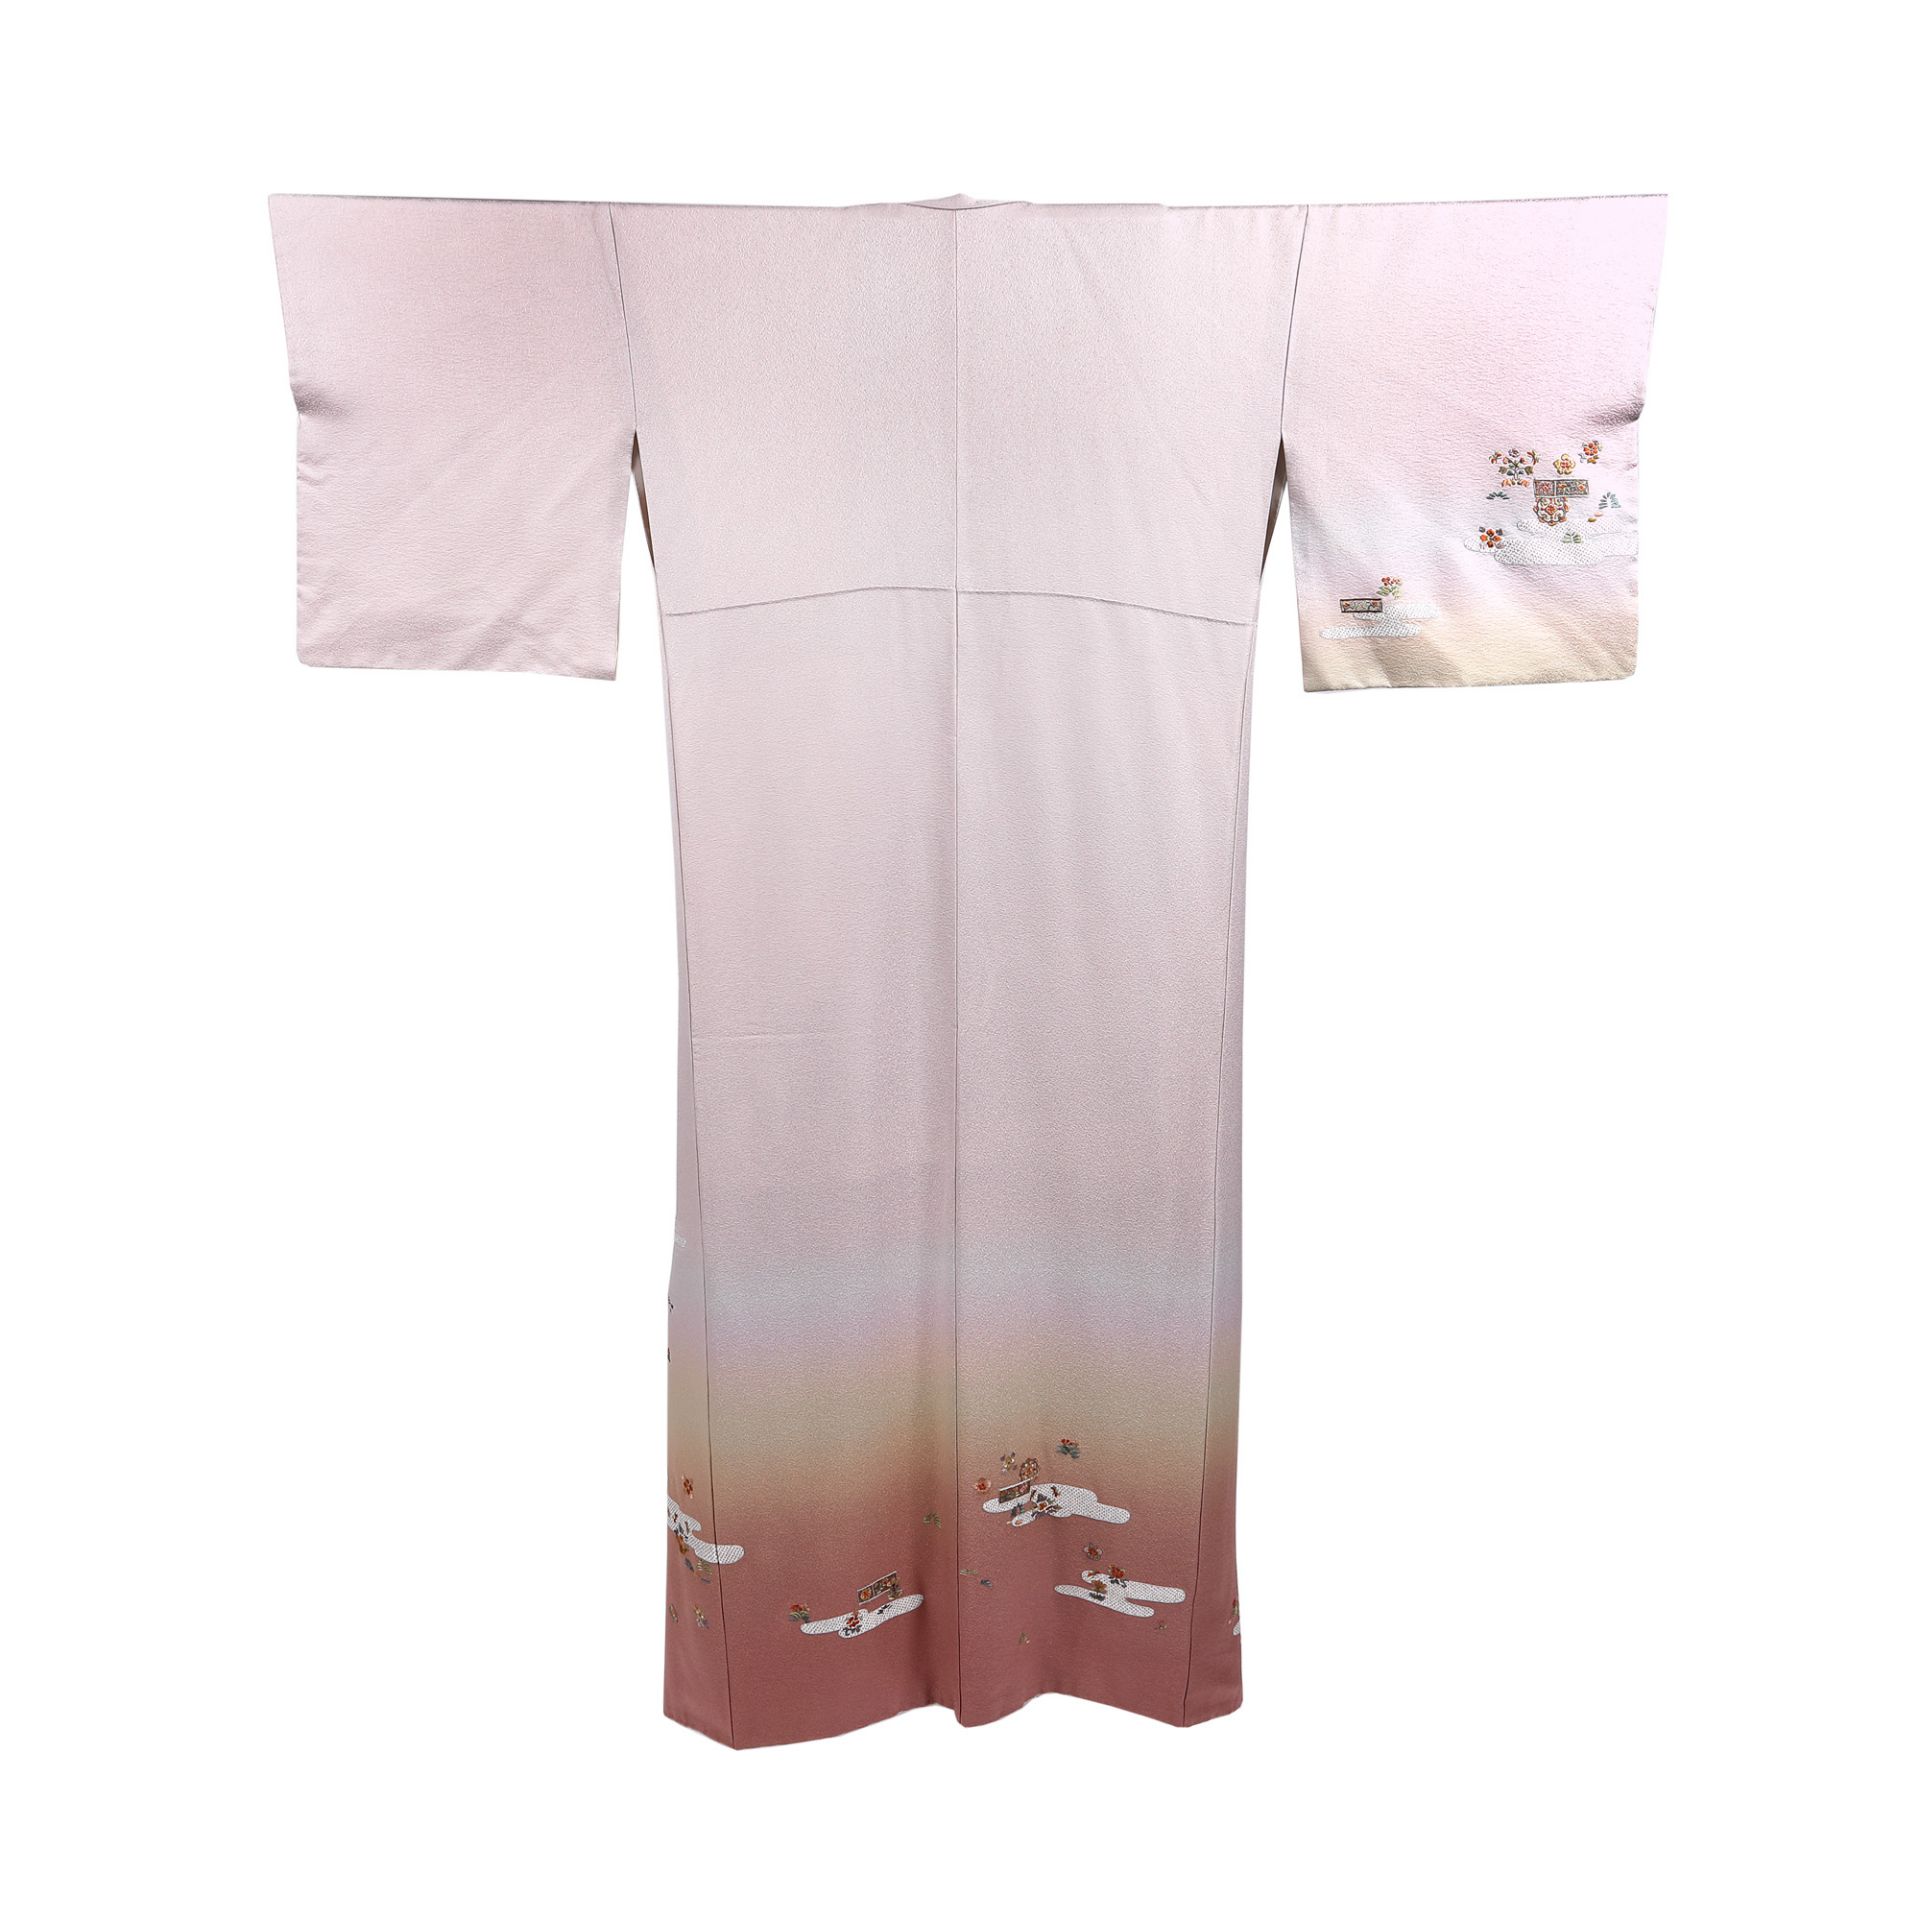 Tsukesage (formal kimono) made of silk, embroidered by hand using silk and silver thread, obi decora - Image 4 of 4